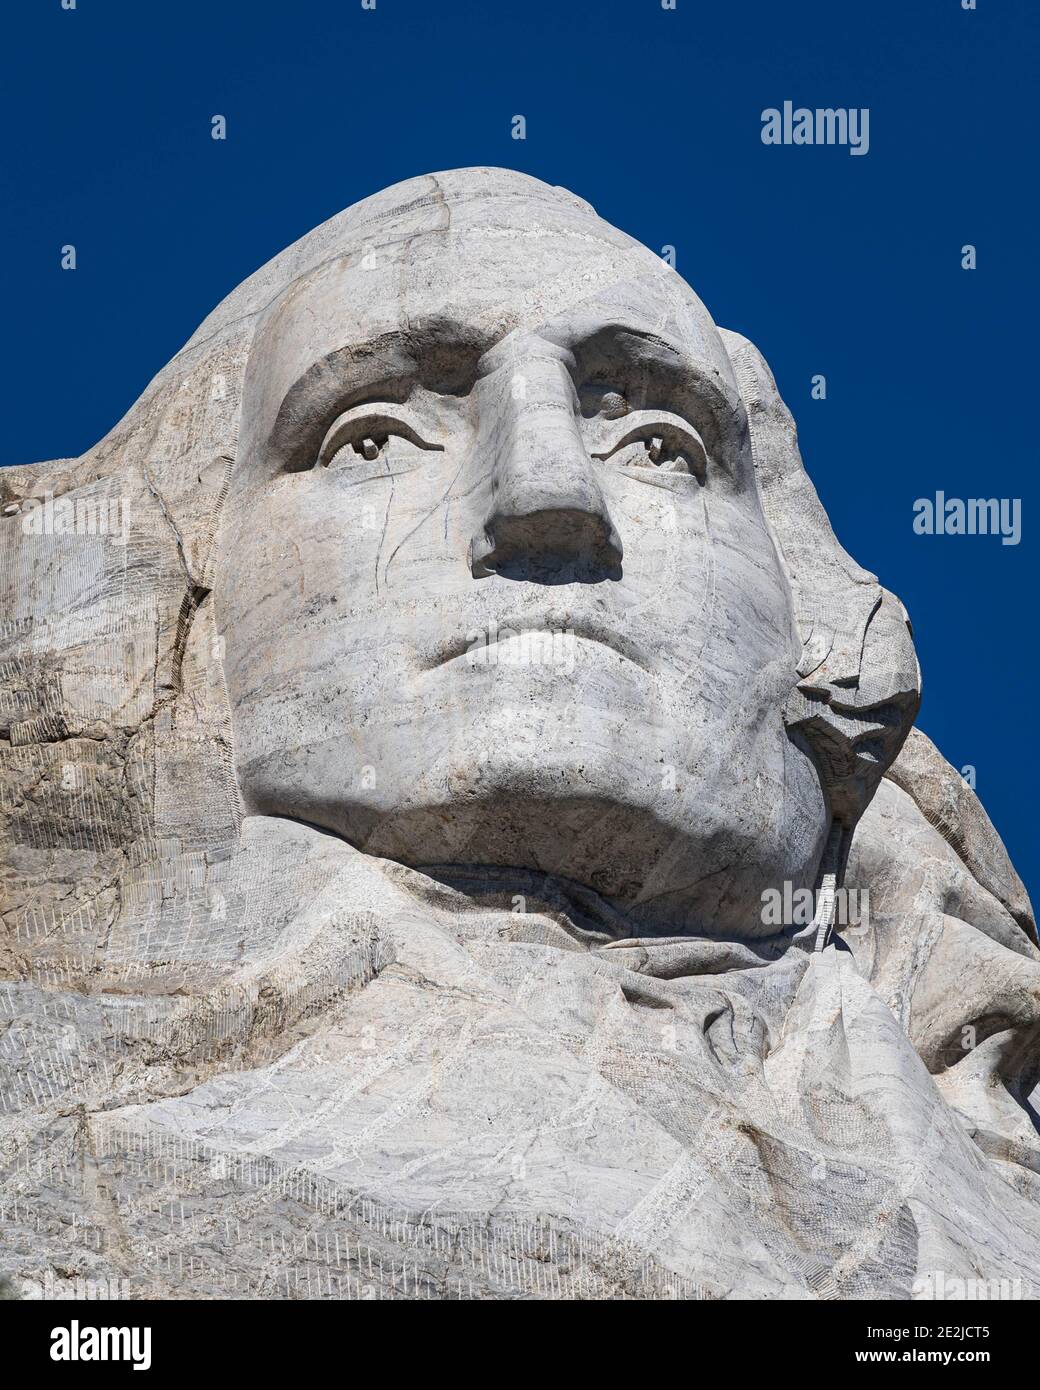 Mount Rushmore National Memorial, a true national treasure.  Symbolizing the ideals of freedom, carved into the granite face of Mount Rushmore. Stock Photo